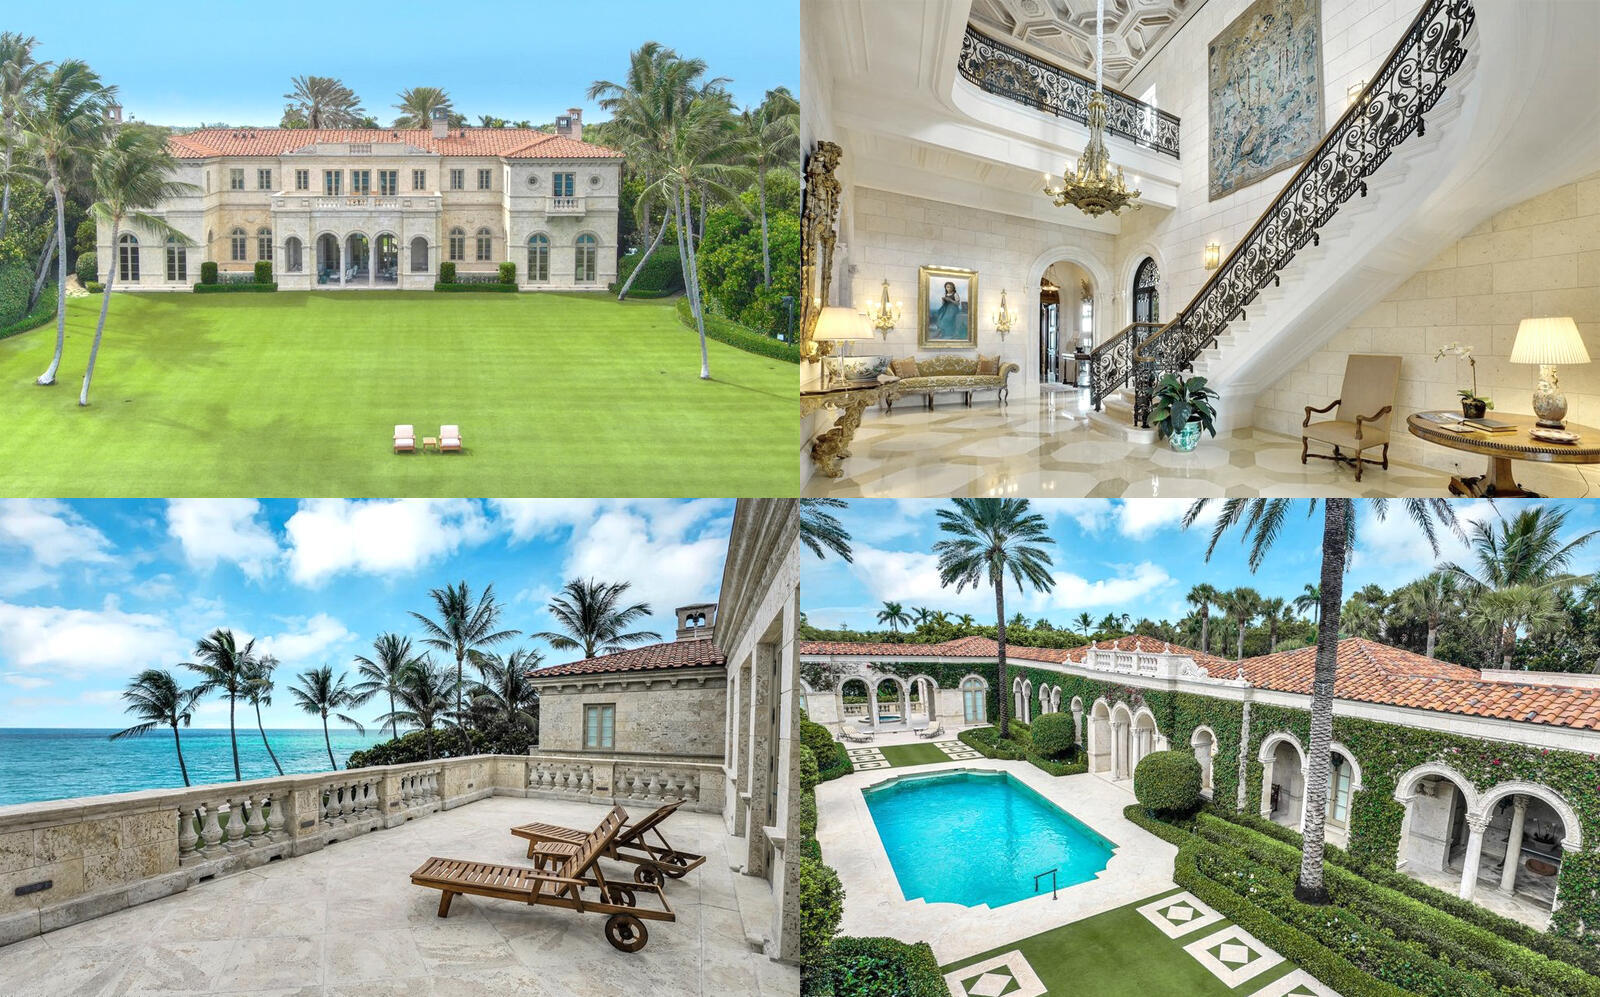 Punch time clock heir sells oceanfront Palm Beach estate for $95M